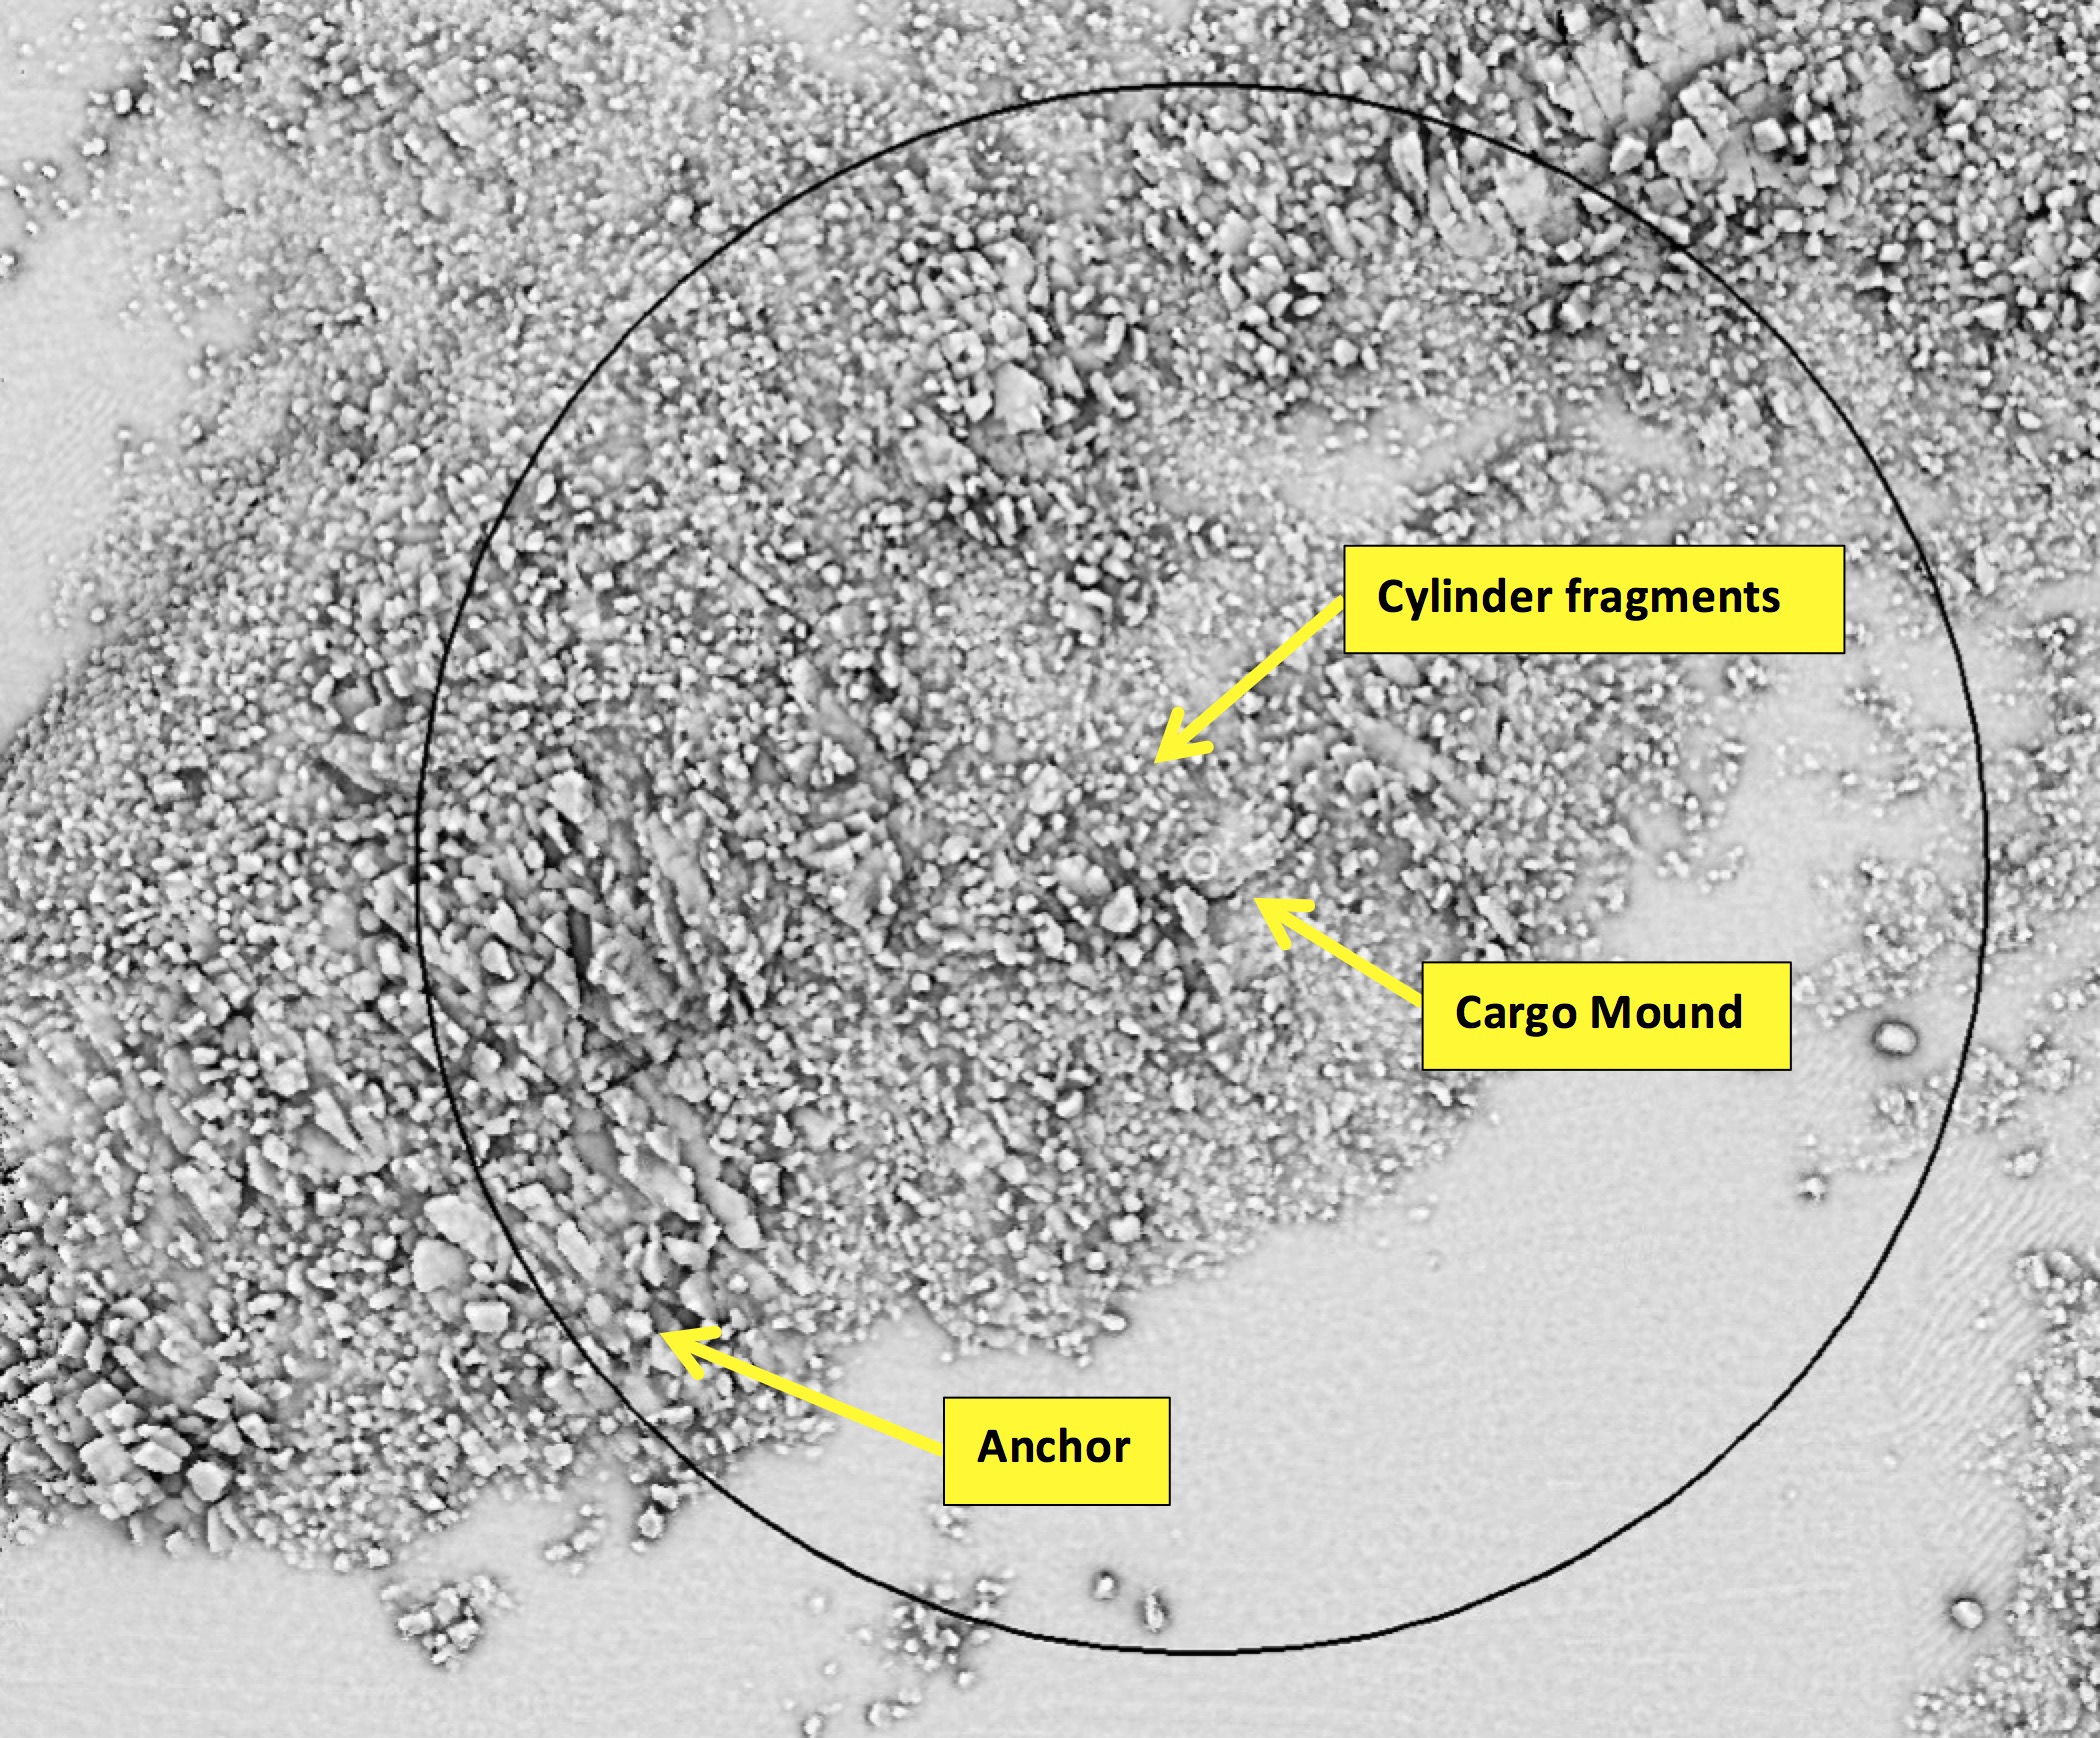 Annotated greyscale image created from multibeam survey data. It has been shaded to show the boulders and areas of sand on the seabed to show the context of the Wheel Wreck nestled amongst the boulders.